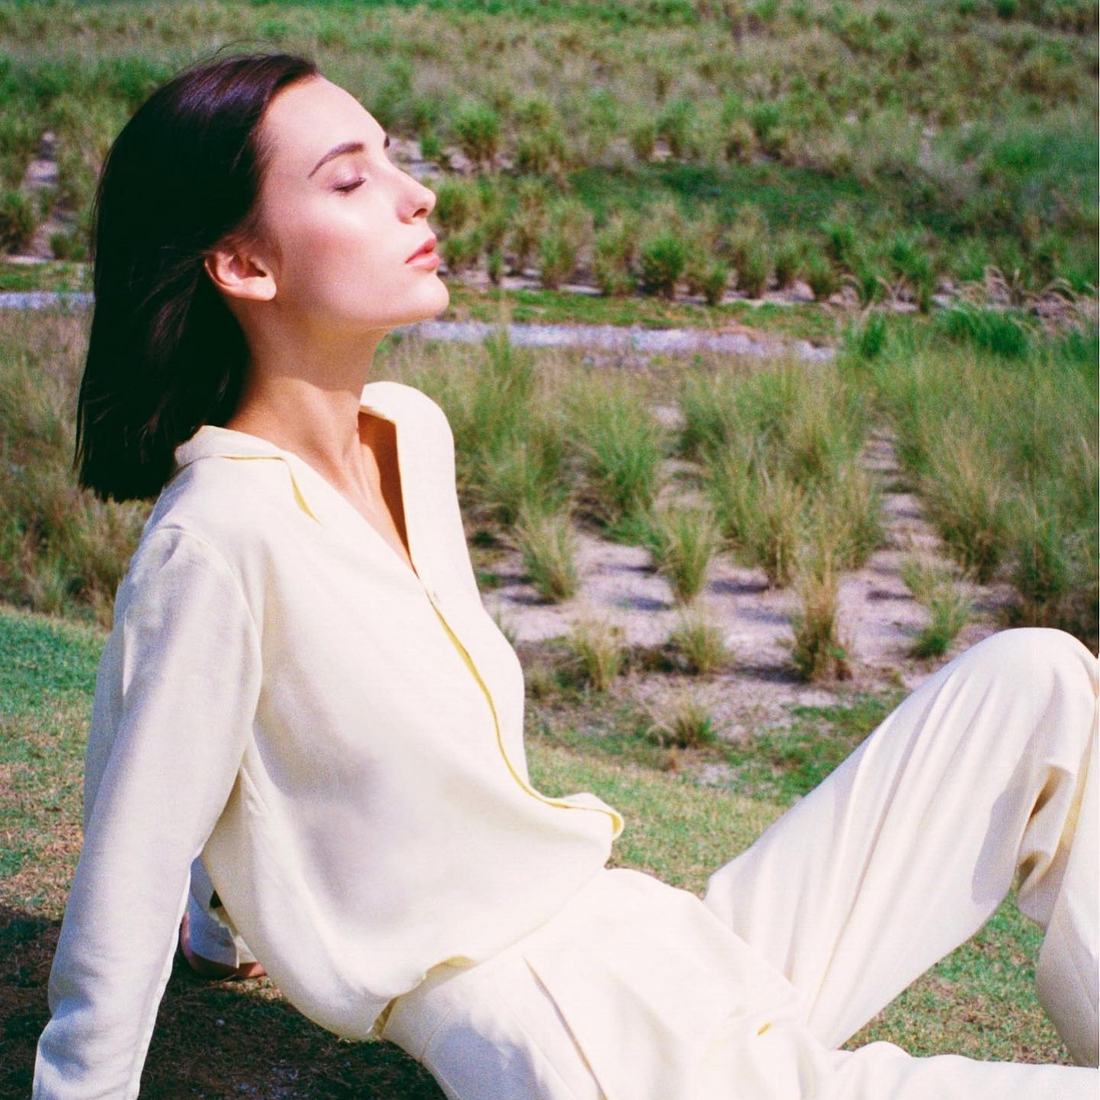 A woman with dark brown hair sits on some grass. She is wearing a white shirt and trousers and has her eyes closed.